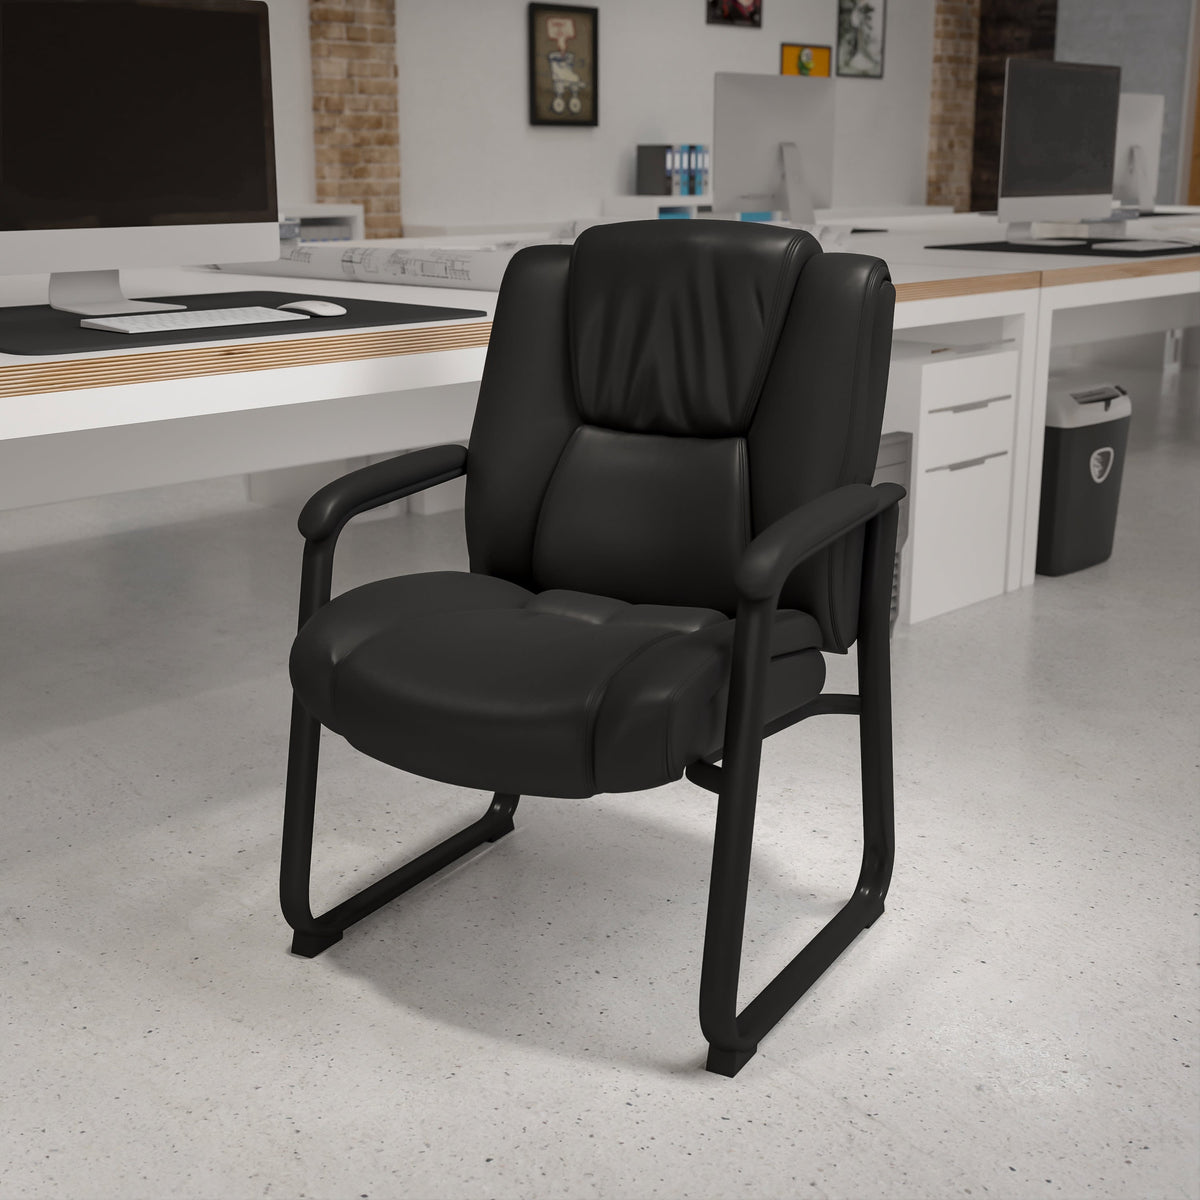 https://www.stackchairs4less.com/cdn/shop/files/HERCULES_Series_Big___Tall_500_lb_Rated_LeatherSoft_Tufted_Executive_Side_Reception_Chair_with_Sled_Base_2023-10-31T23-34-34Z_2.jpg?v=1699035051&width=1200